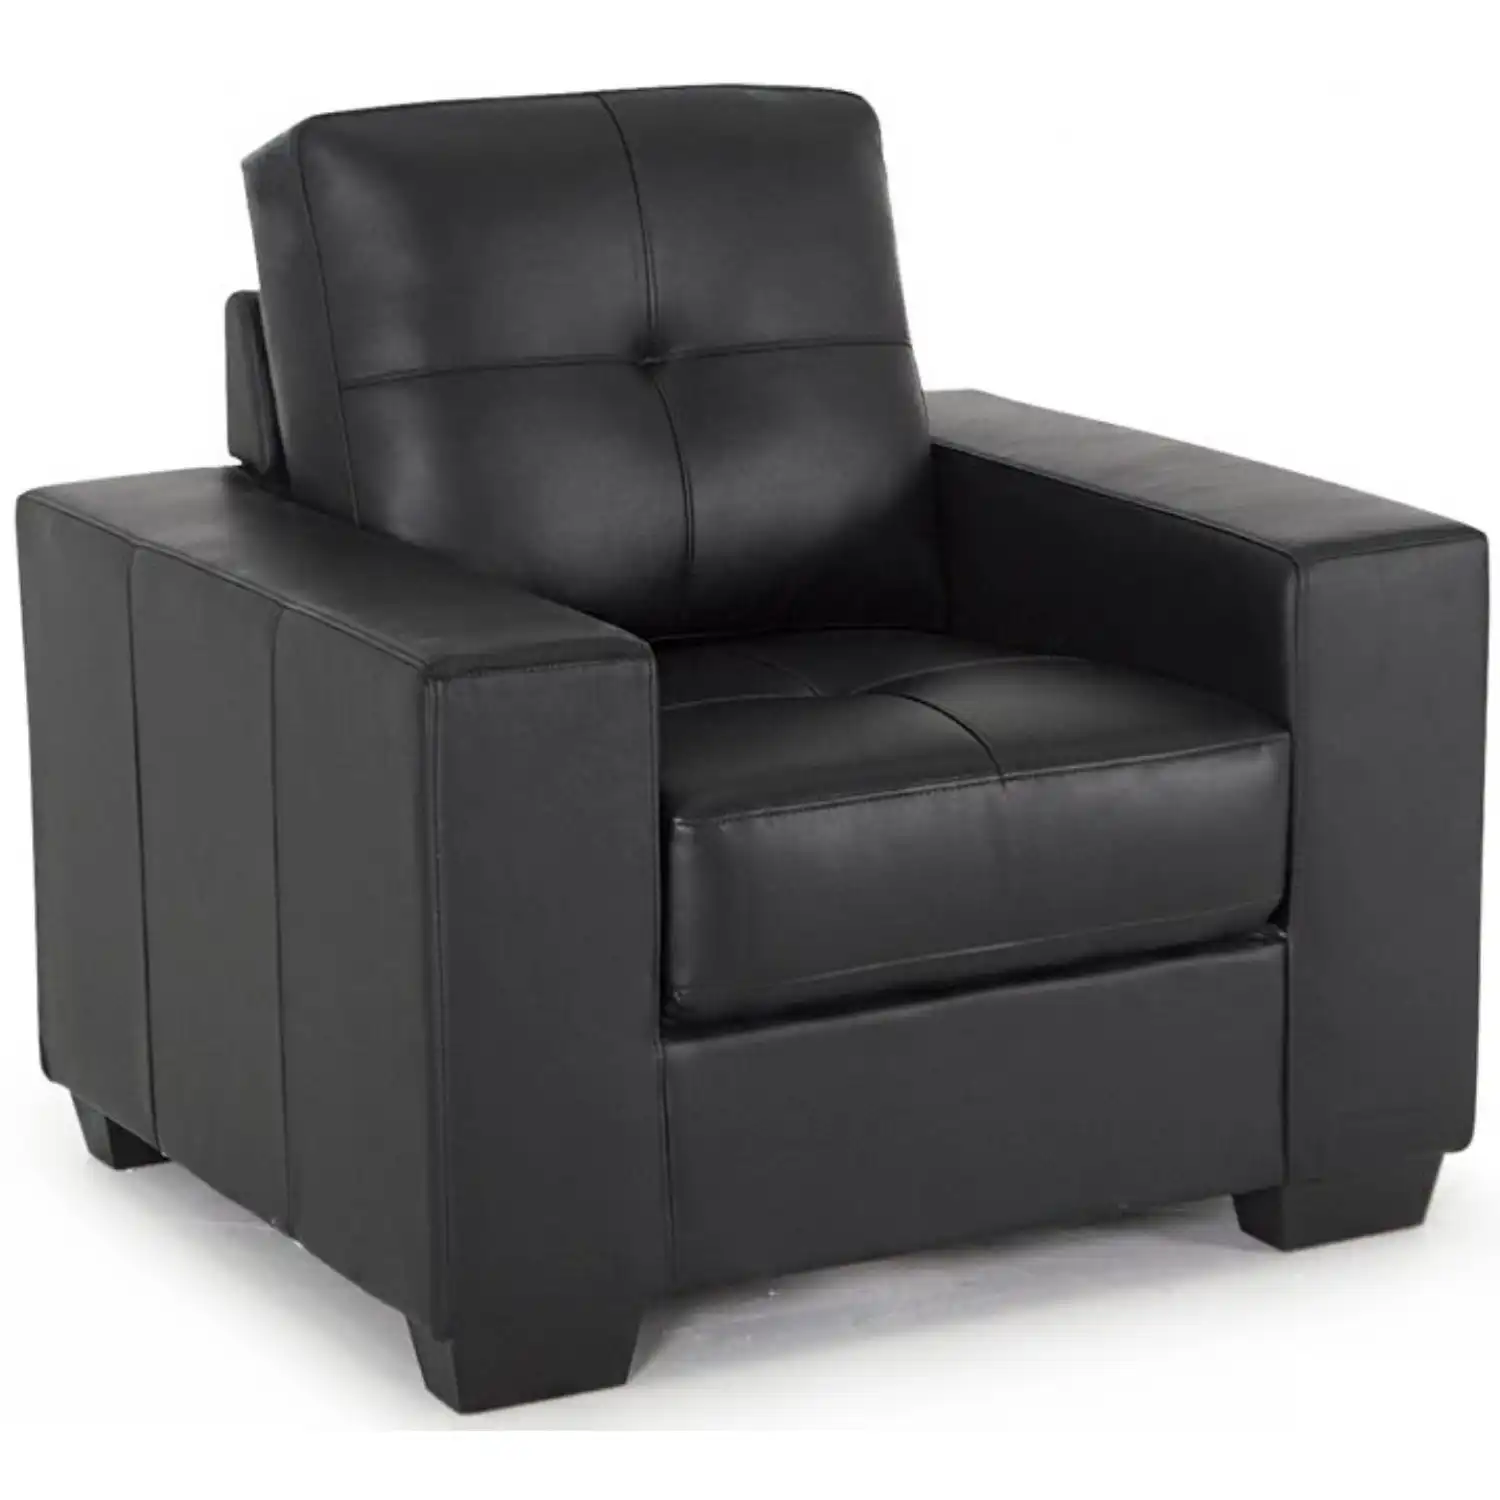 1 Seater Leather Black Armchair